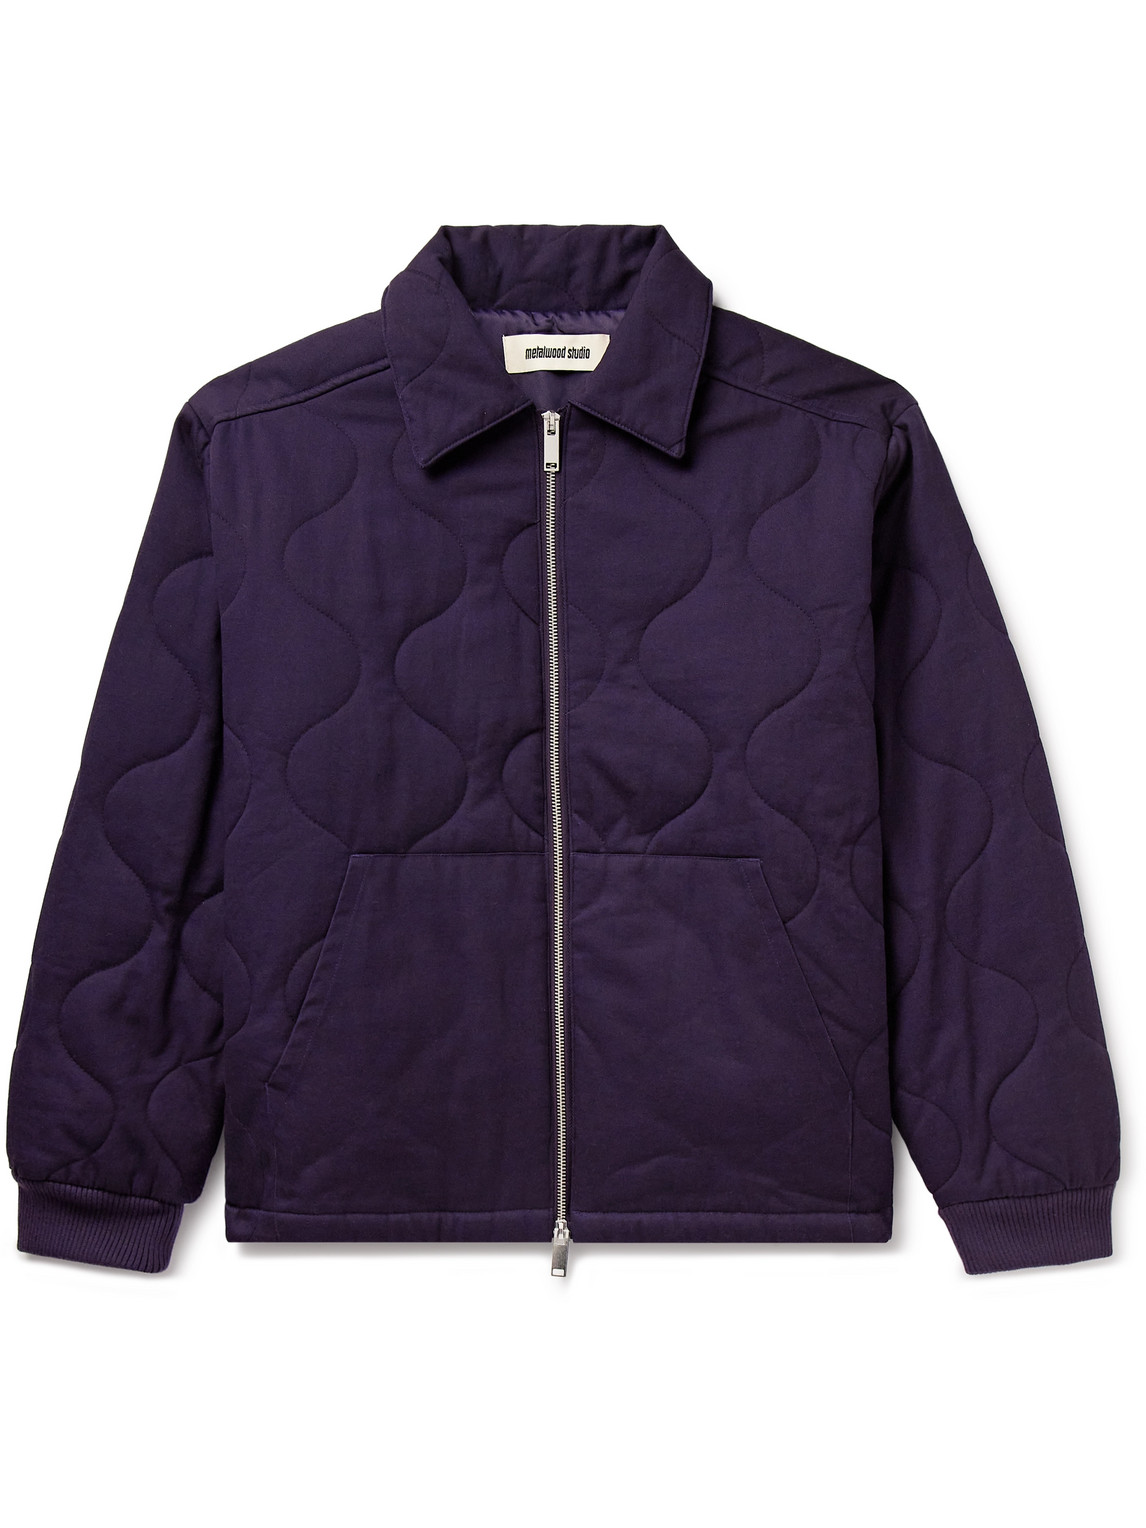 Throwing Fits Logo-Embroidered Quilted Cotton-Twill Jacket